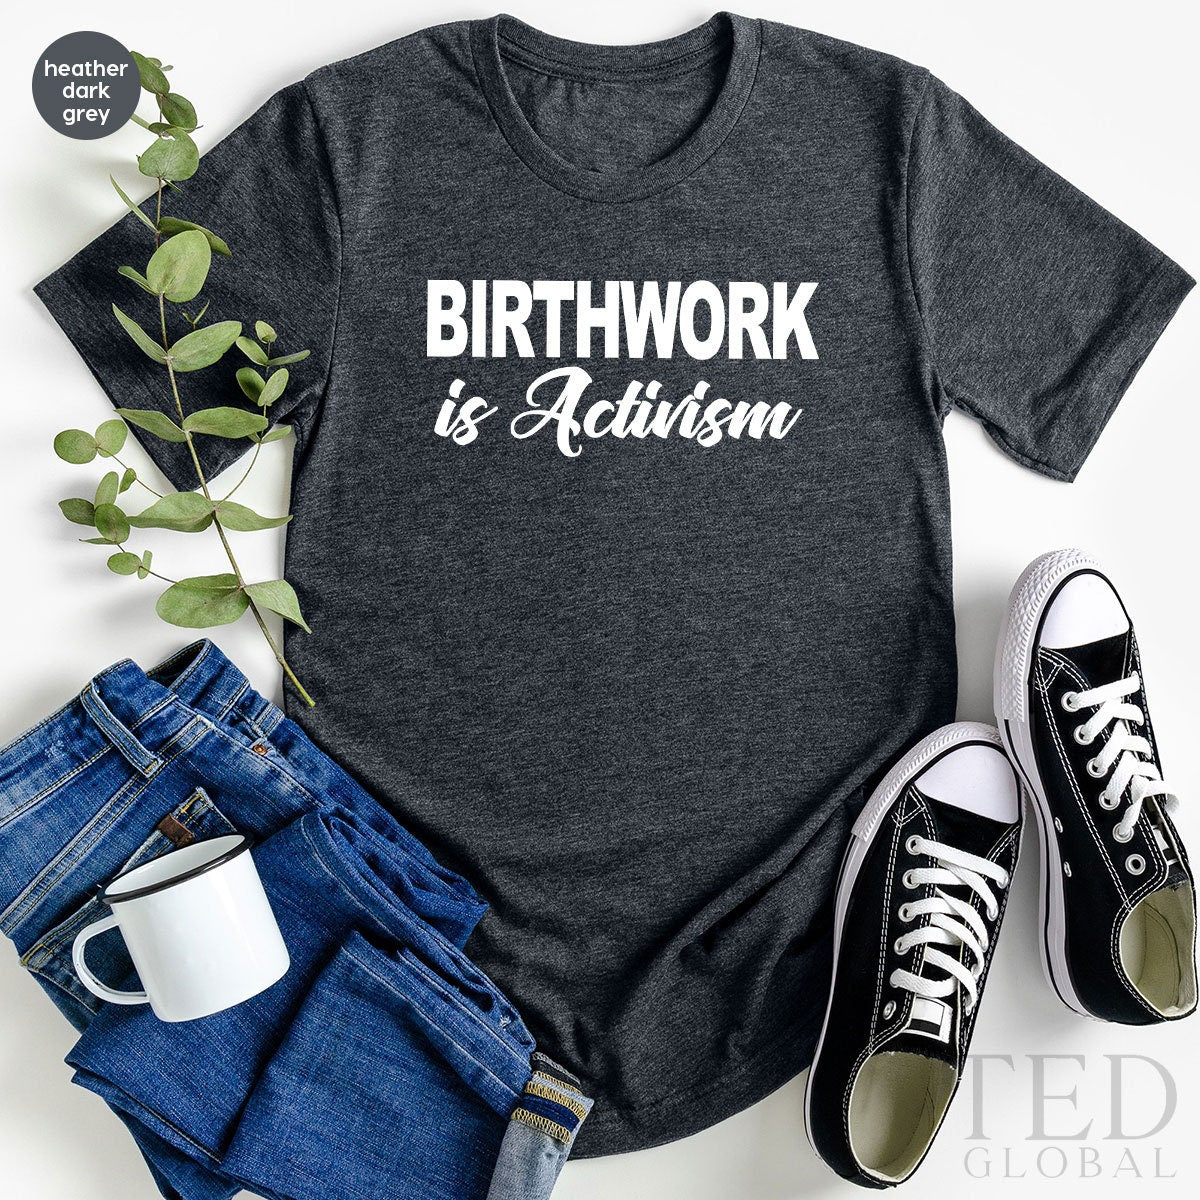 Midwife Shirt, Birth Worker TShirt, Doula Gift, Birthwork Is Activism Shirt, Midwife Student T-Shirt, Midlife Life Tee, Midwifery T Shirt - Fastdeliverytees.com